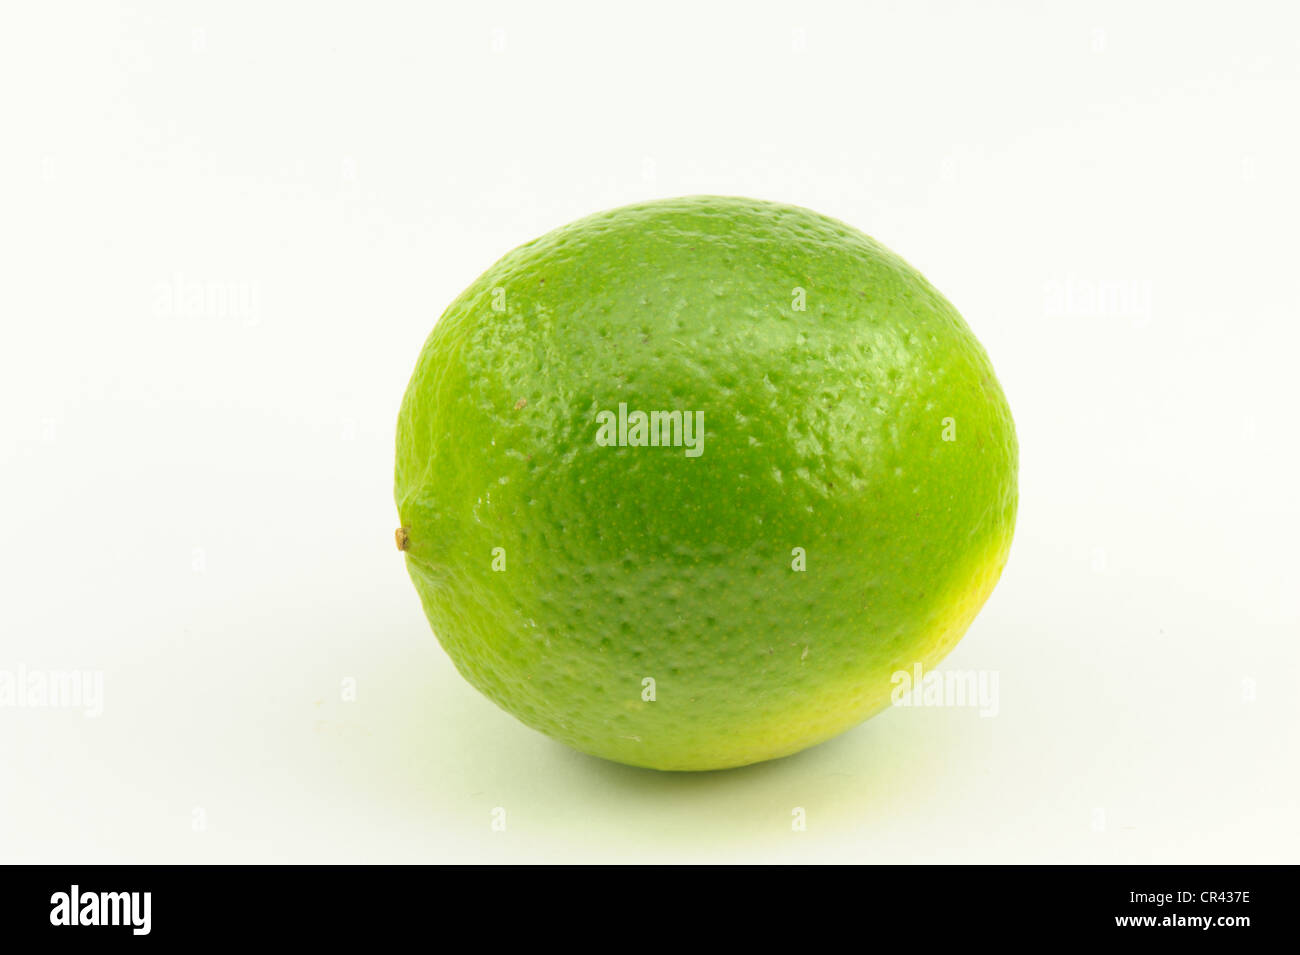 lime fruit green taken on a white background shiny skin food cooking bitter tasting sharp acidic perfect sliced with gin Stock Photo